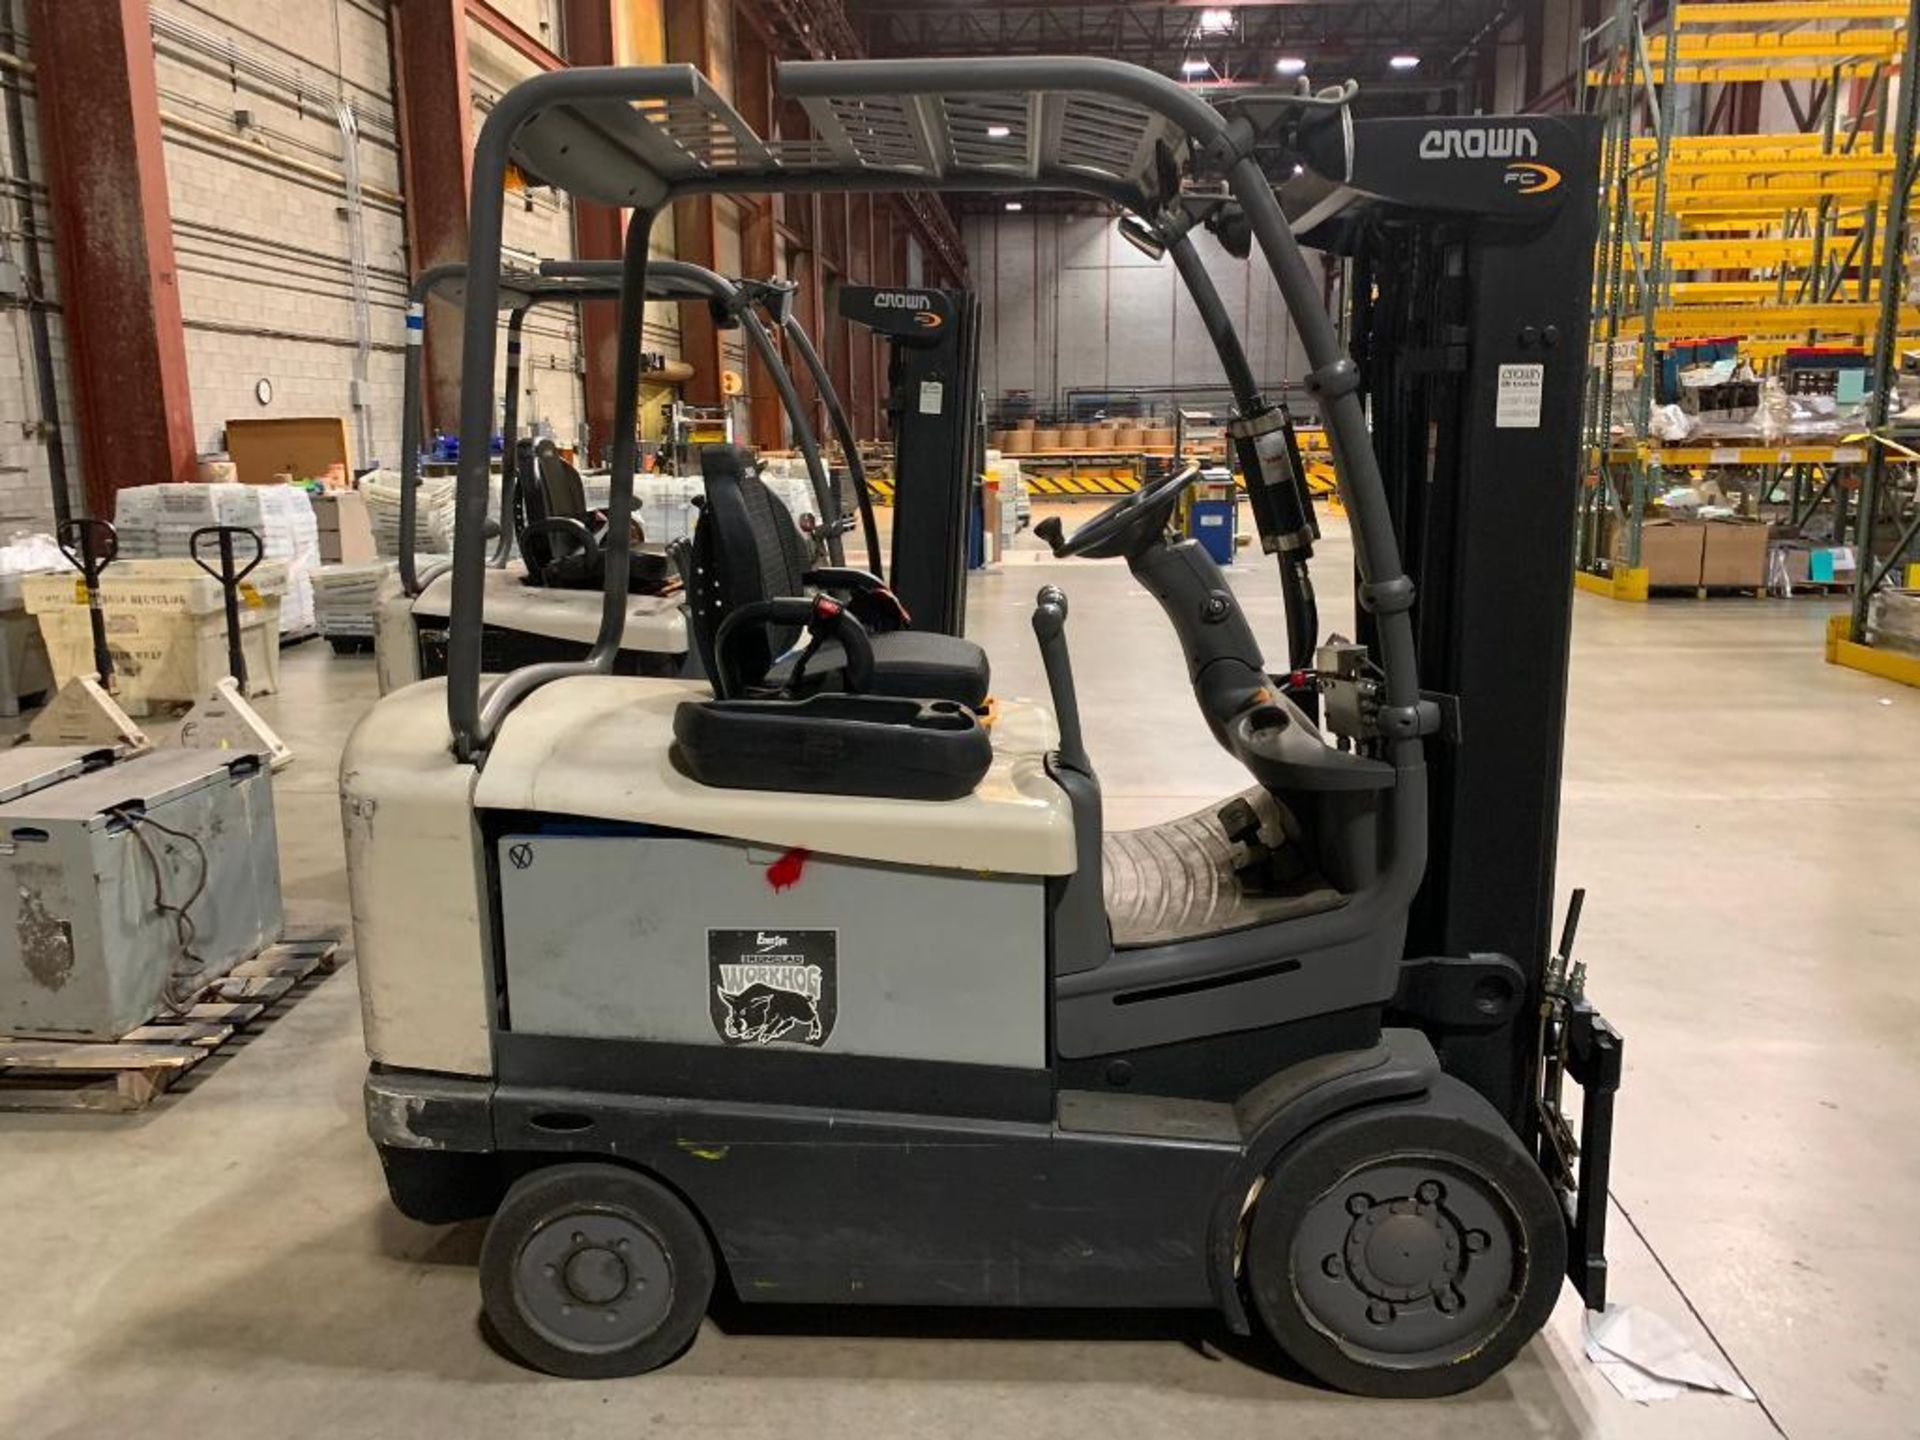 Crown 6,000 LB. Capacity Electric Forklift, Model FC4540-60, 36V, 3-Stage Mast, 180" Max. Load Heigh - Image 3 of 7